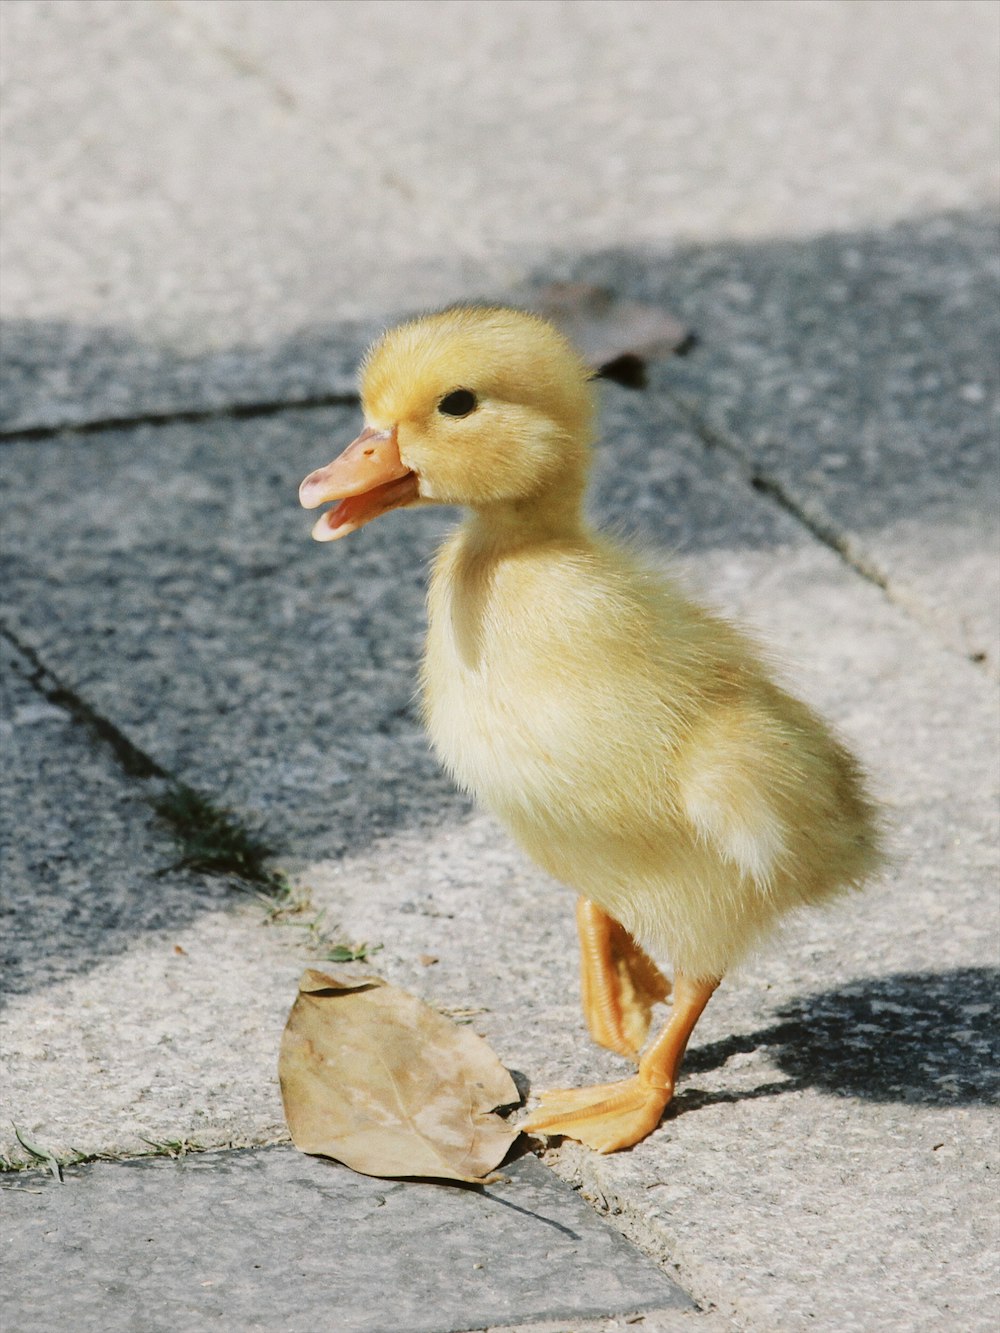 a small duck standing on a sidewalk next to a leaf